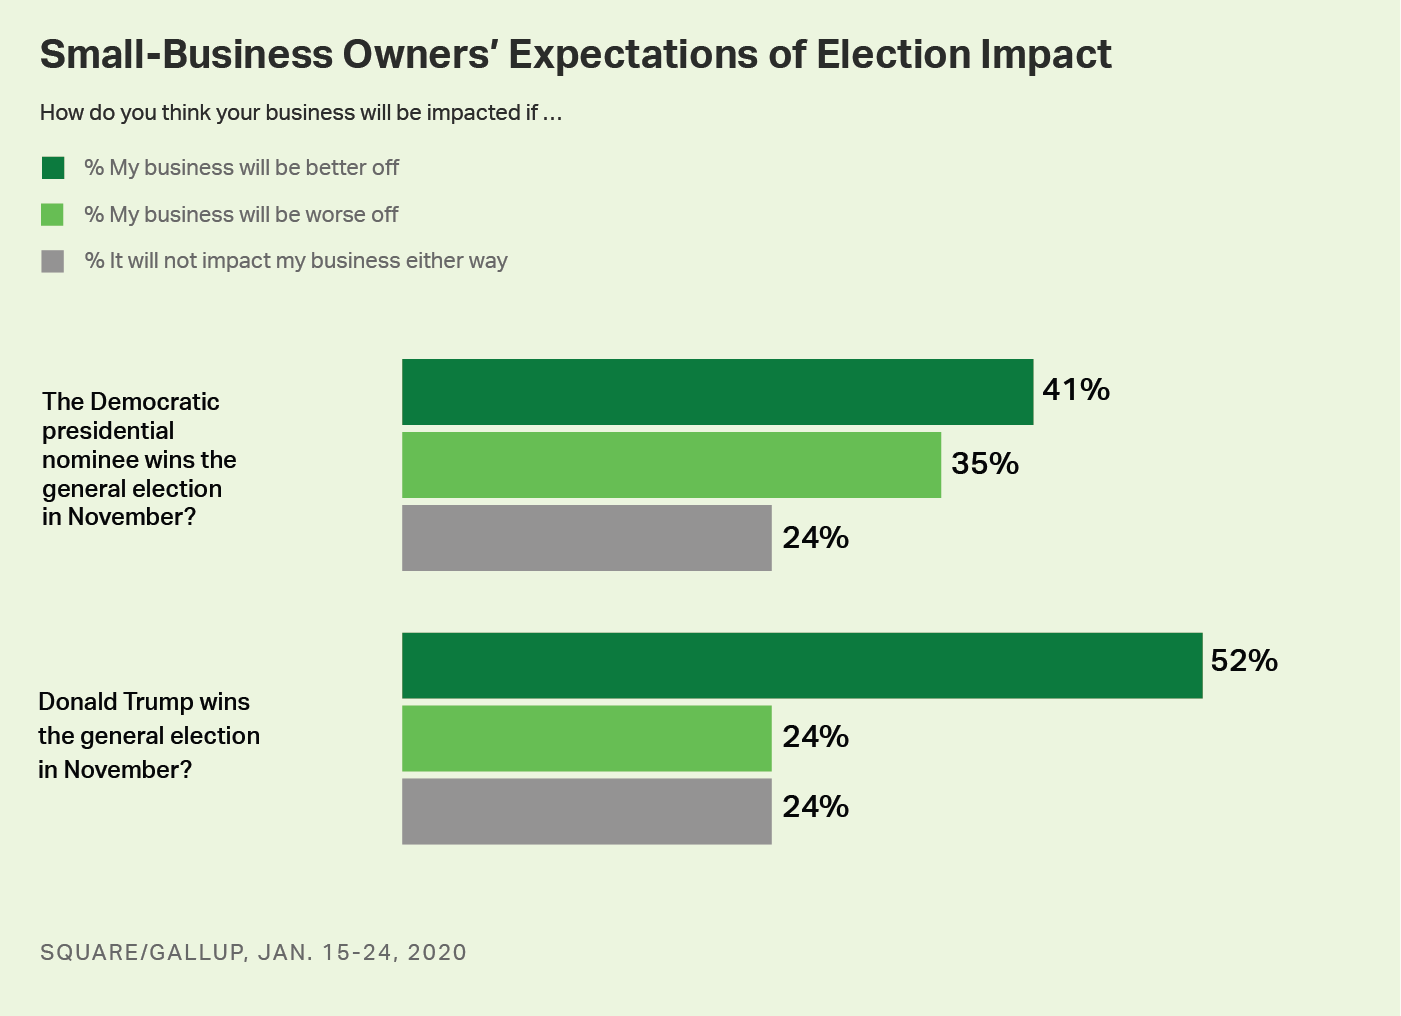 Bar chart. Small-business owners’ views of how their businesses will be affected, depending on who wins the general election.